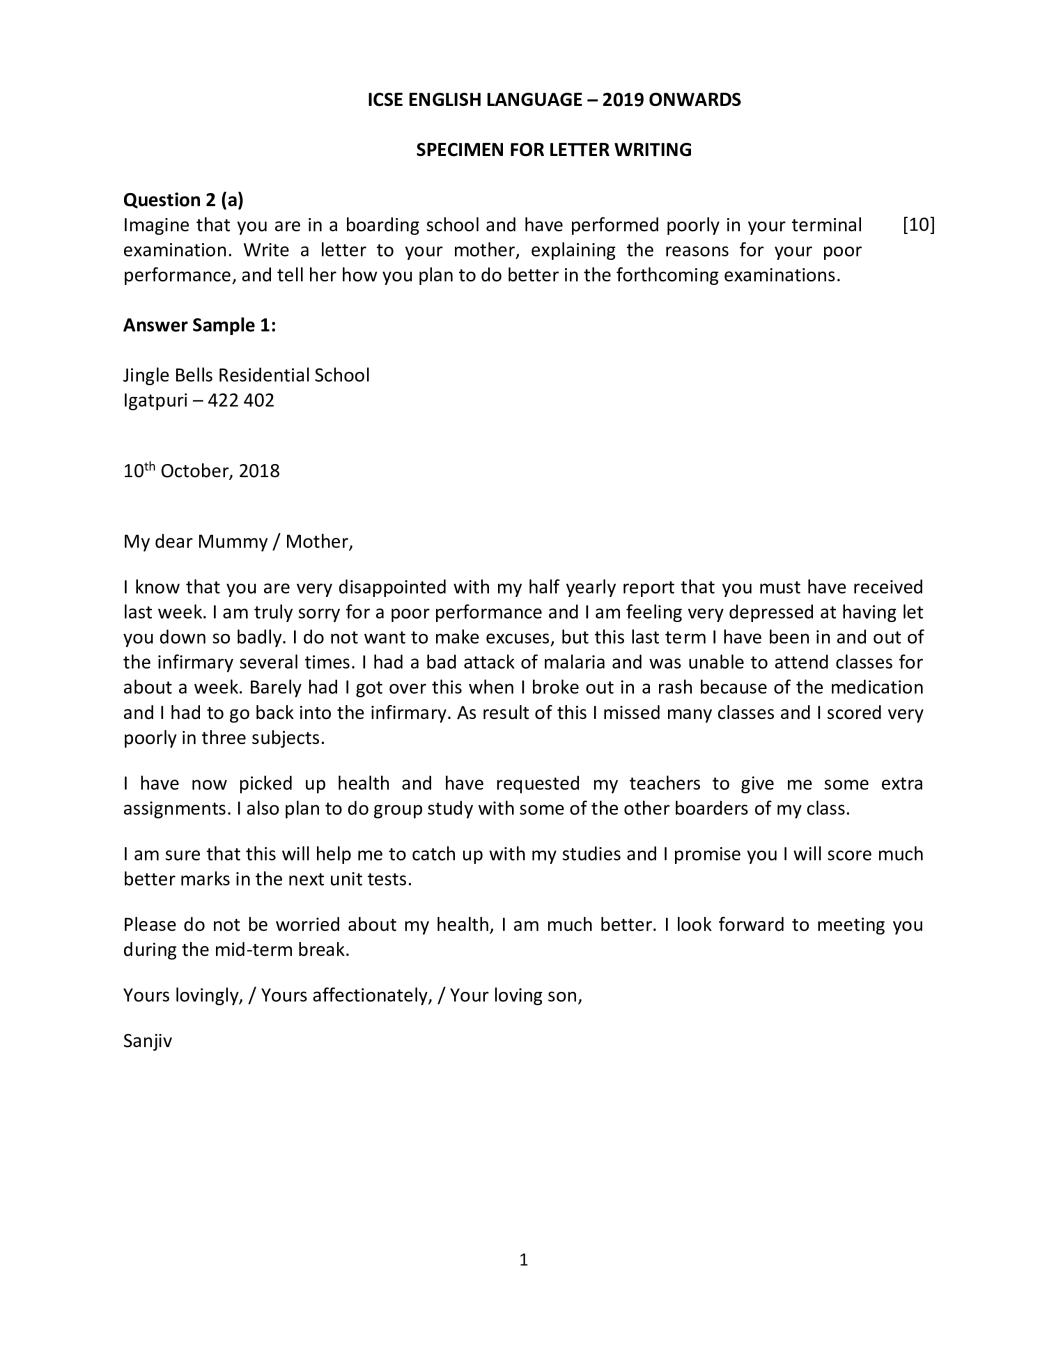 Letter Writing In English New Format - Letter